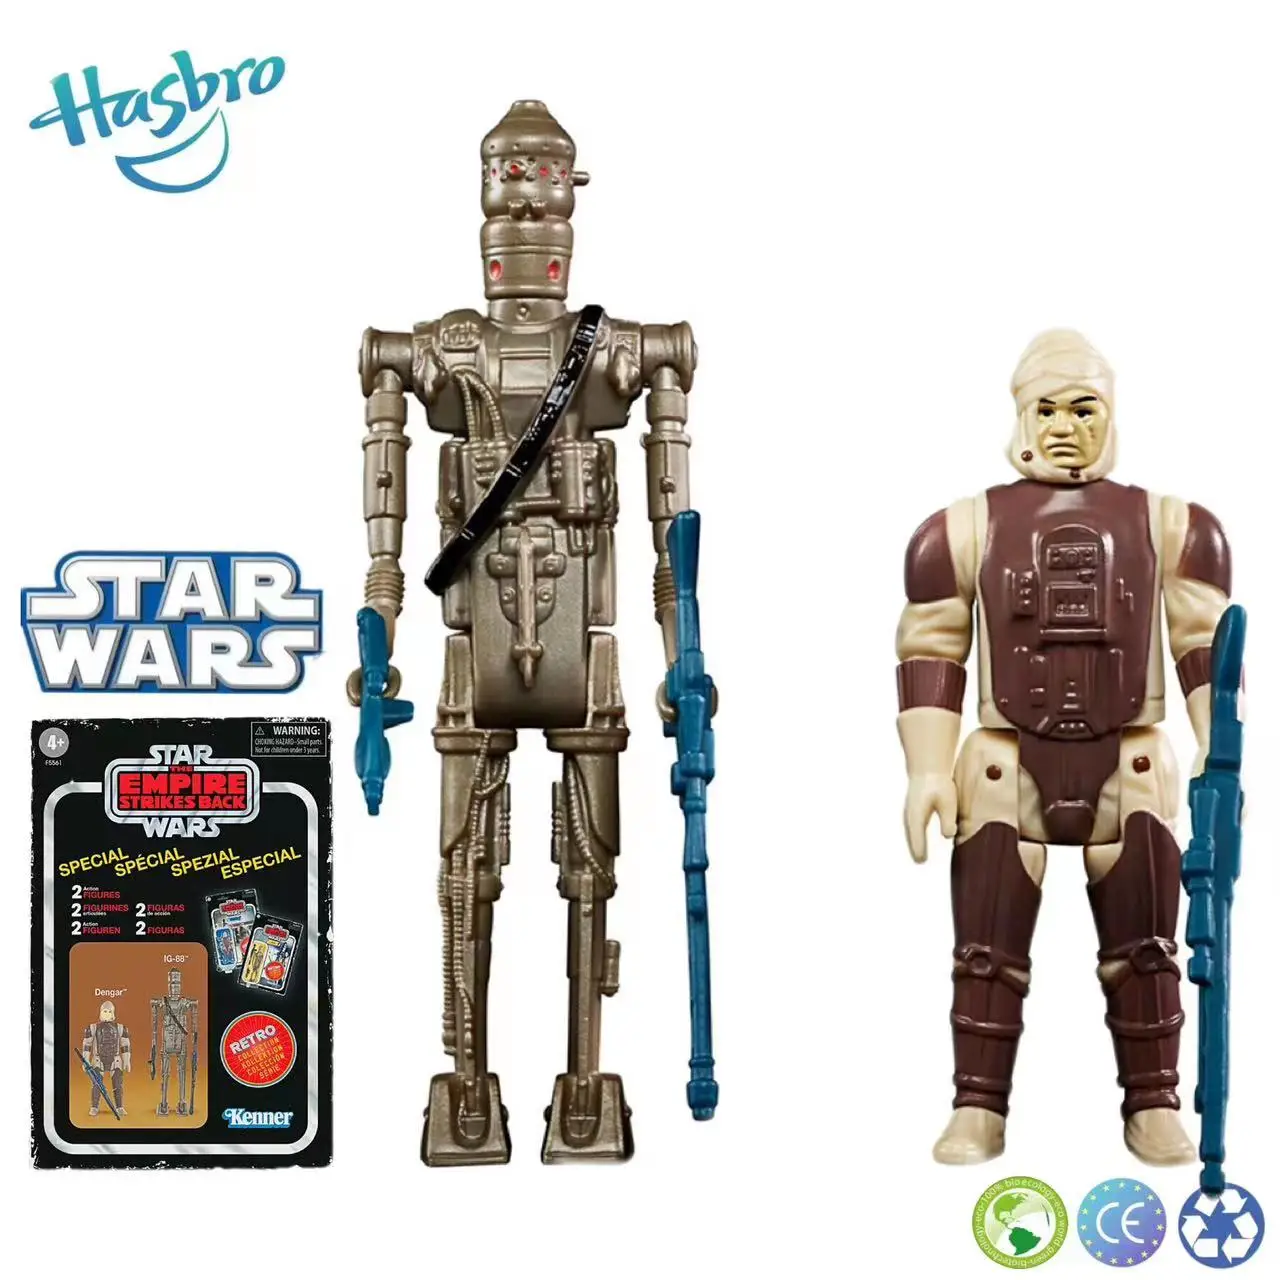 

Hasbro Star Wars The Empire Strikes Back Retro Collection Special Bounty Hunter 2-Pack Dengar IG-88 Action Figure Toy 3.75 Inch